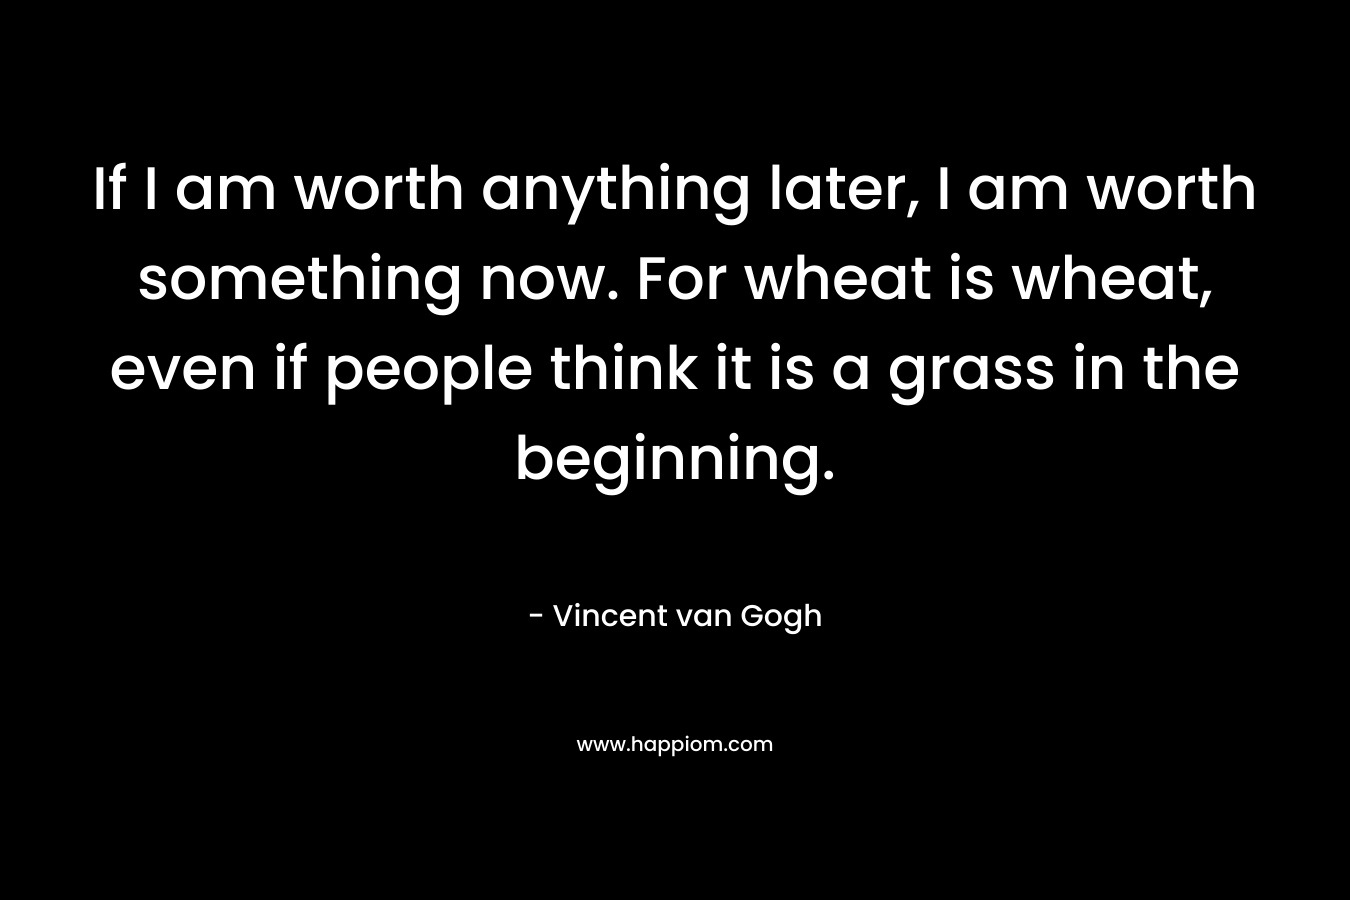 If I am worth anything later, I am worth something now. For wheat is wheat, even if people think it is a grass in the beginning.